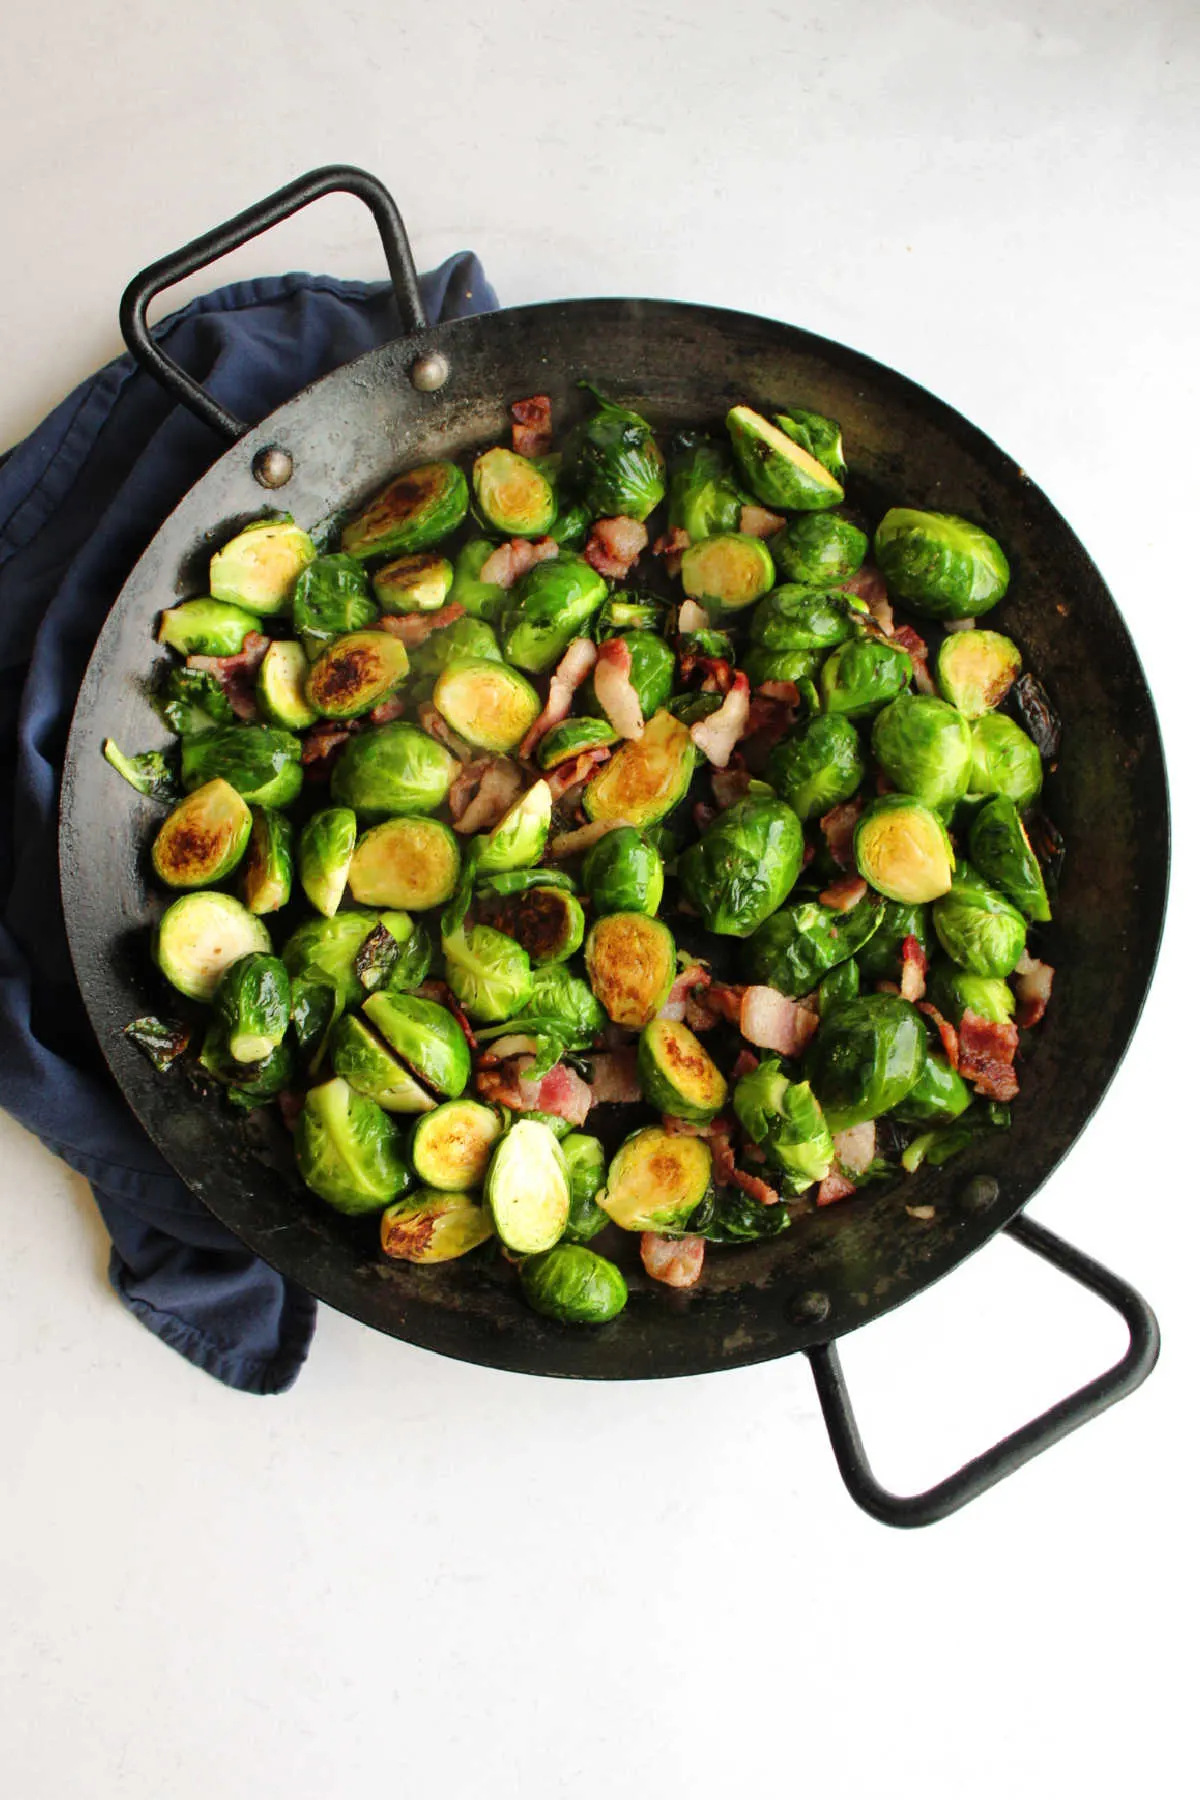 Large black pan filled with roasted brussels sprouts and bacon fresh from the stove.